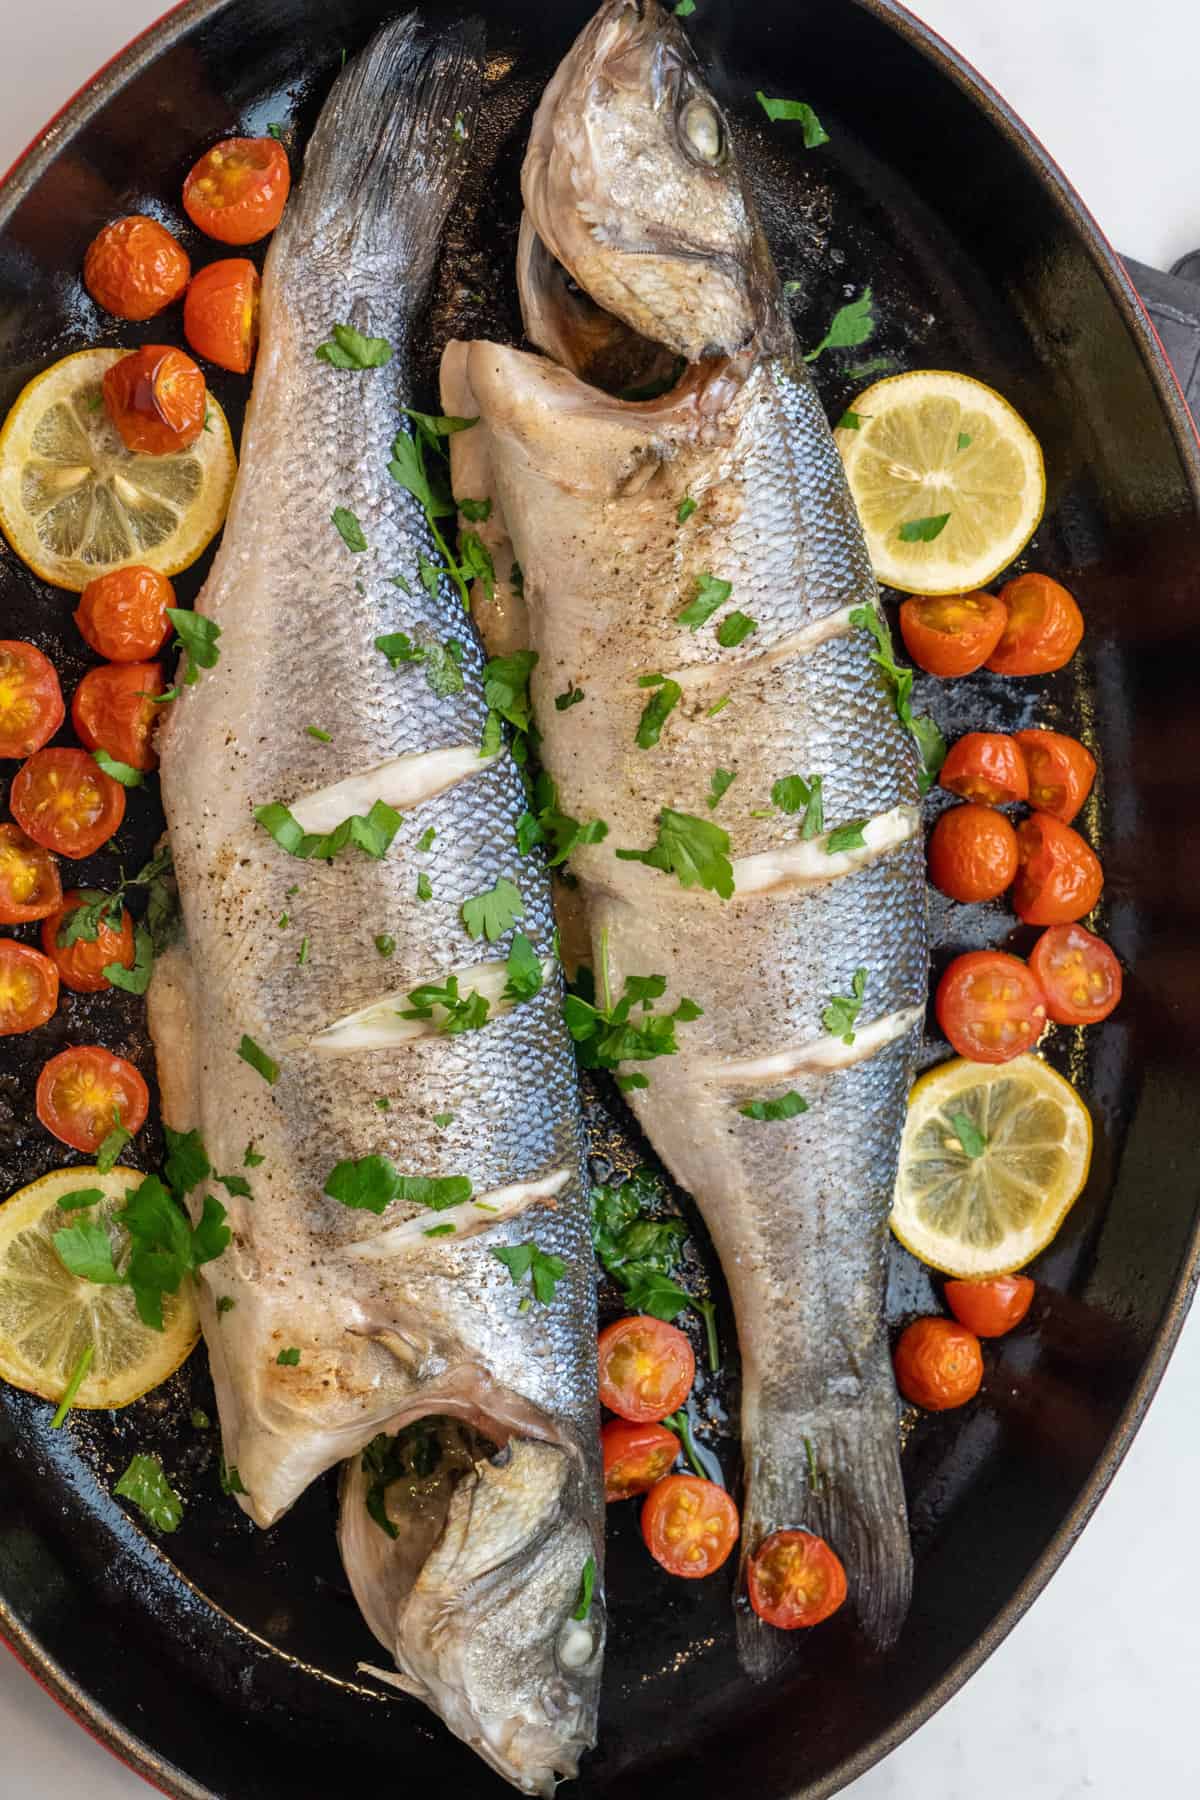 This Branzino Al Forno is made with whole branzino, olive oil, cherry tomatoes, lemon slices, butter, parsley and baked to perfection.